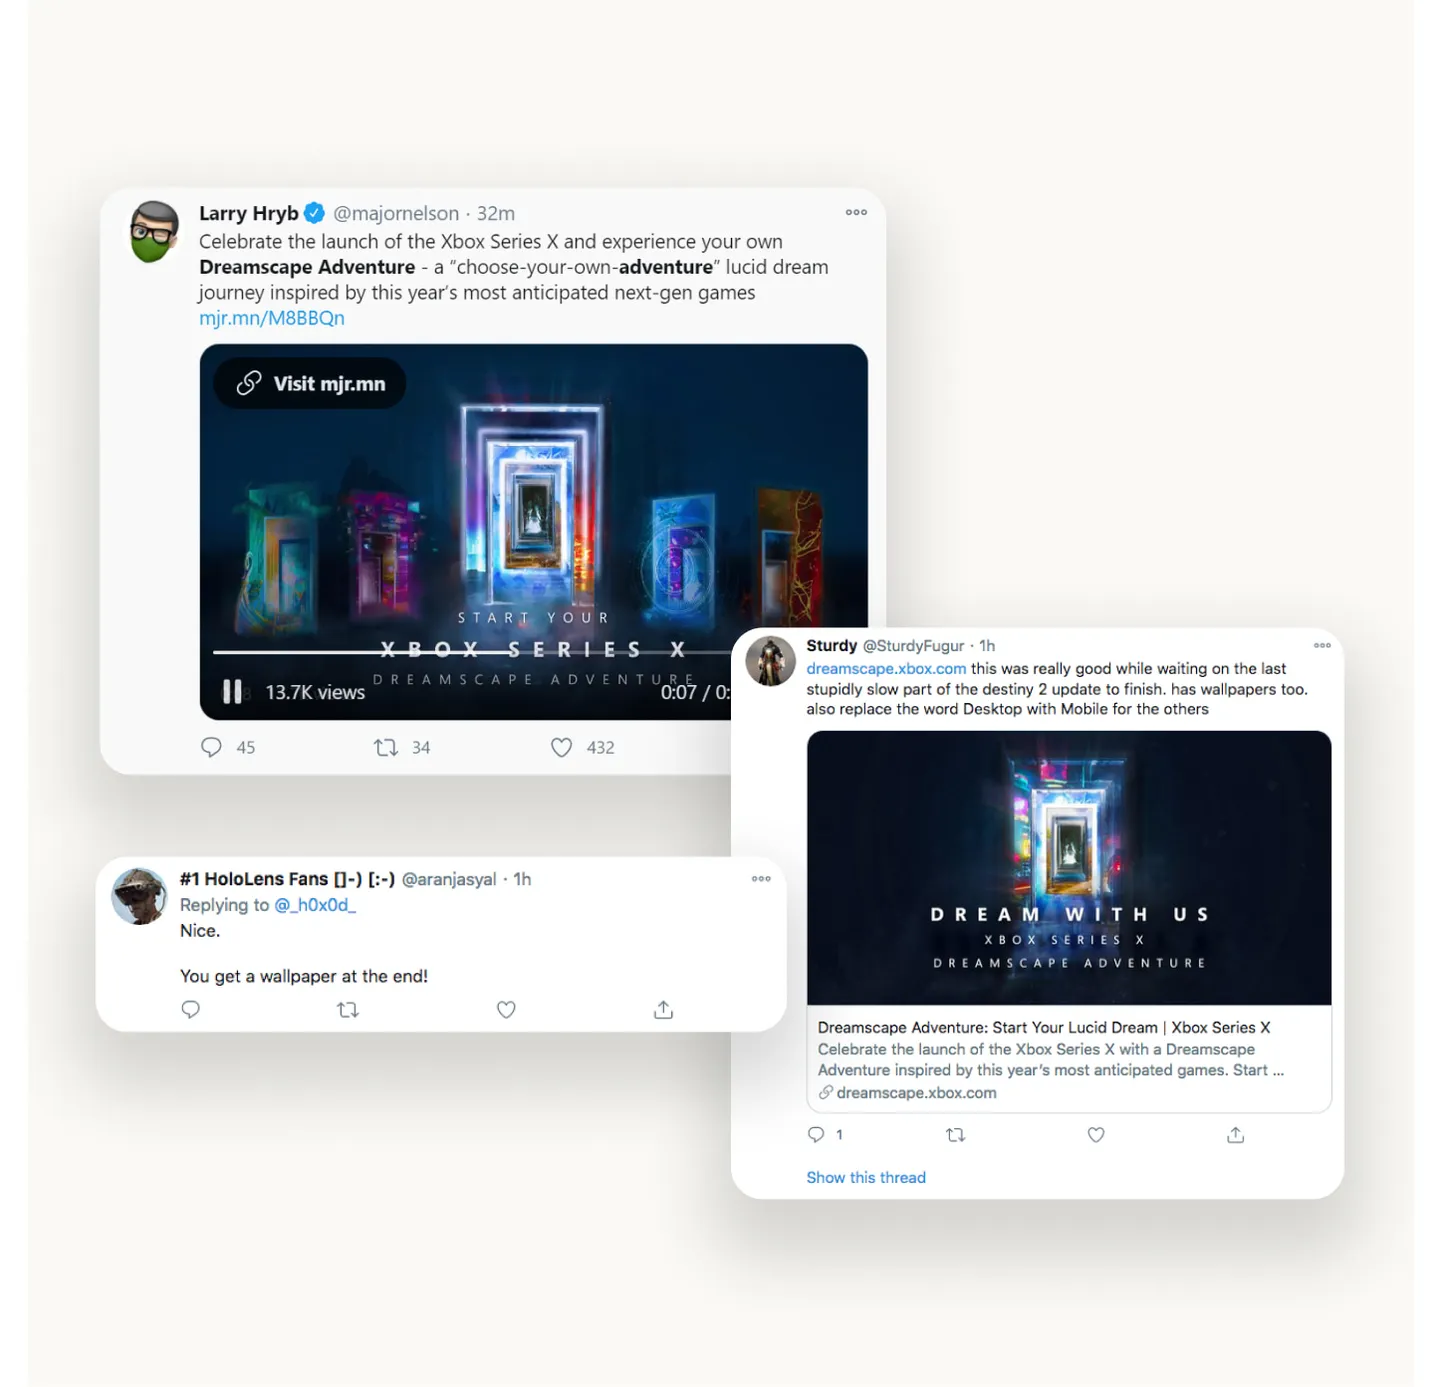 Composite image of social posts promoting the experience